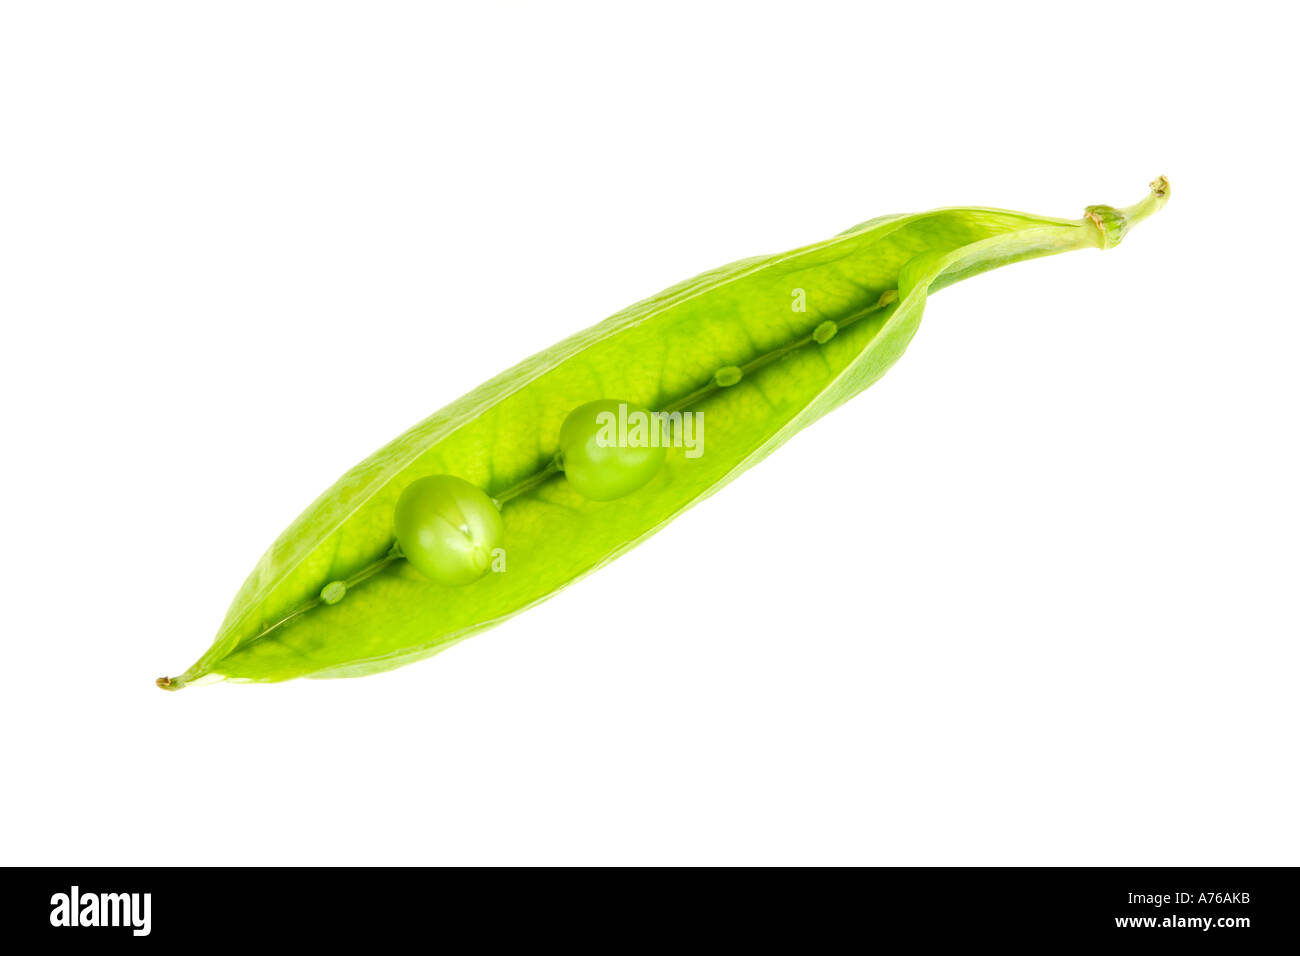 Pea pod on a pure white background (two peas in a pod). Stock Photo